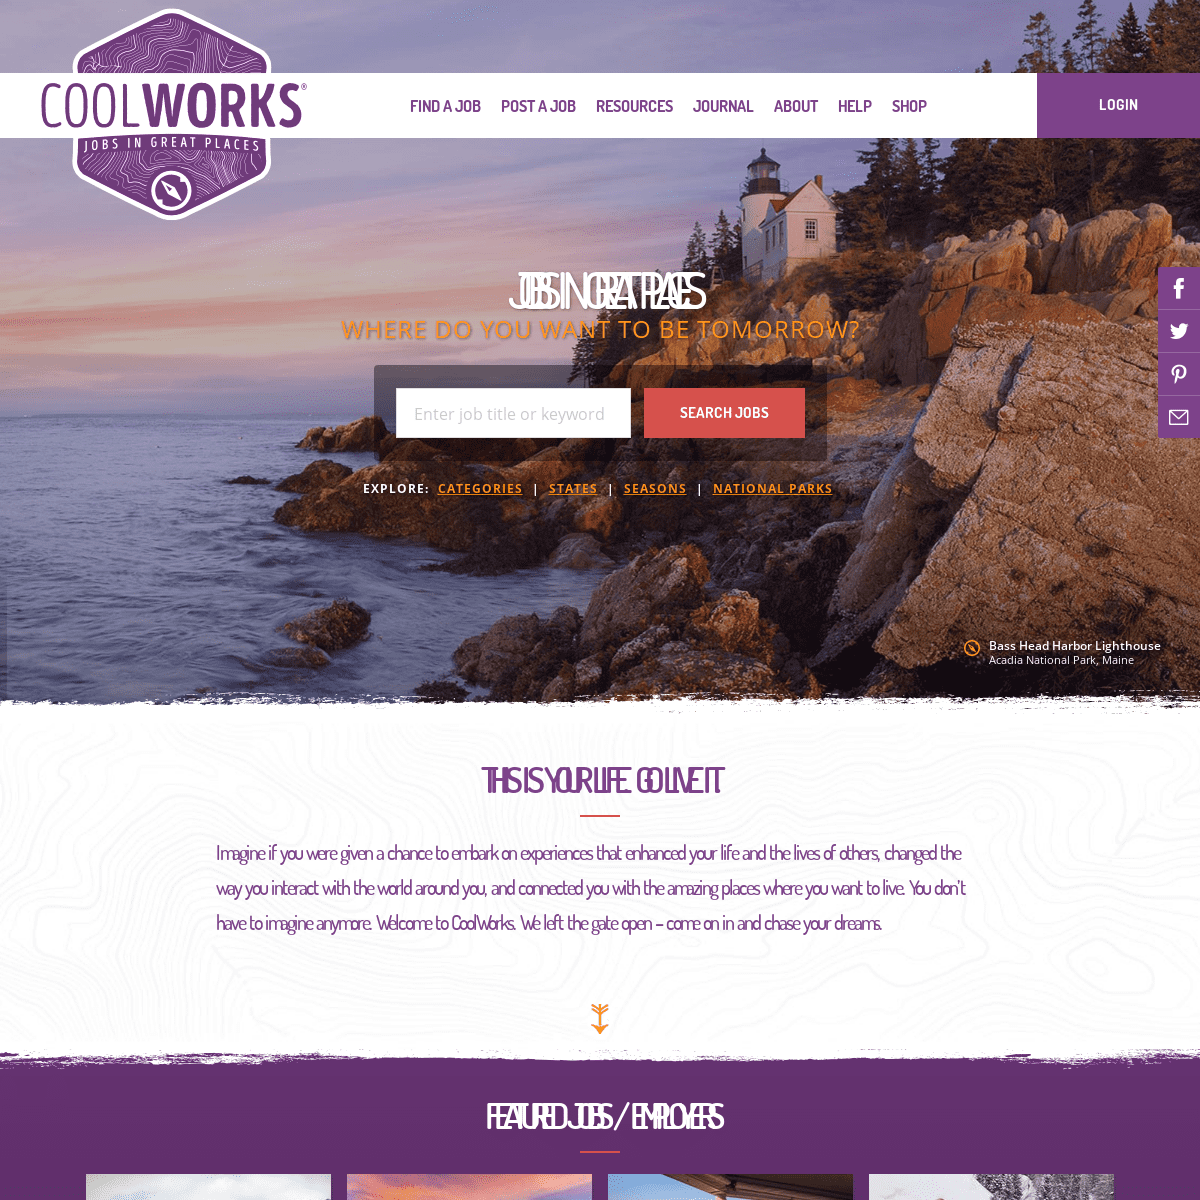 CoolWorks.com - Jobs in Great Places